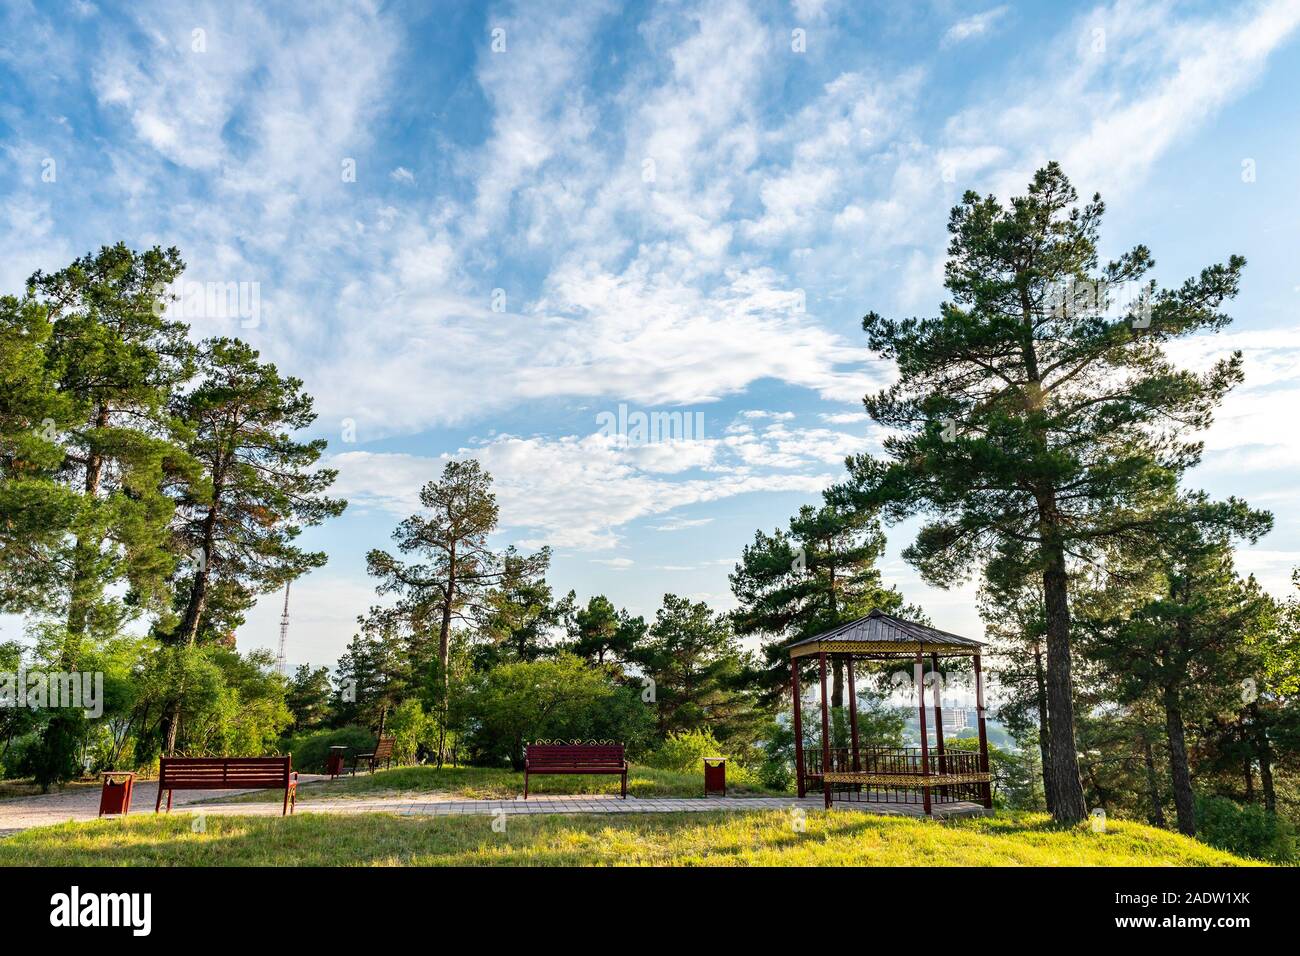 Dushanbe Victory Park Pobedy Picturesque Breathtaking View of a Sitting Bench and Pavilion on a Sunset Blue Sky Day Stock Photo